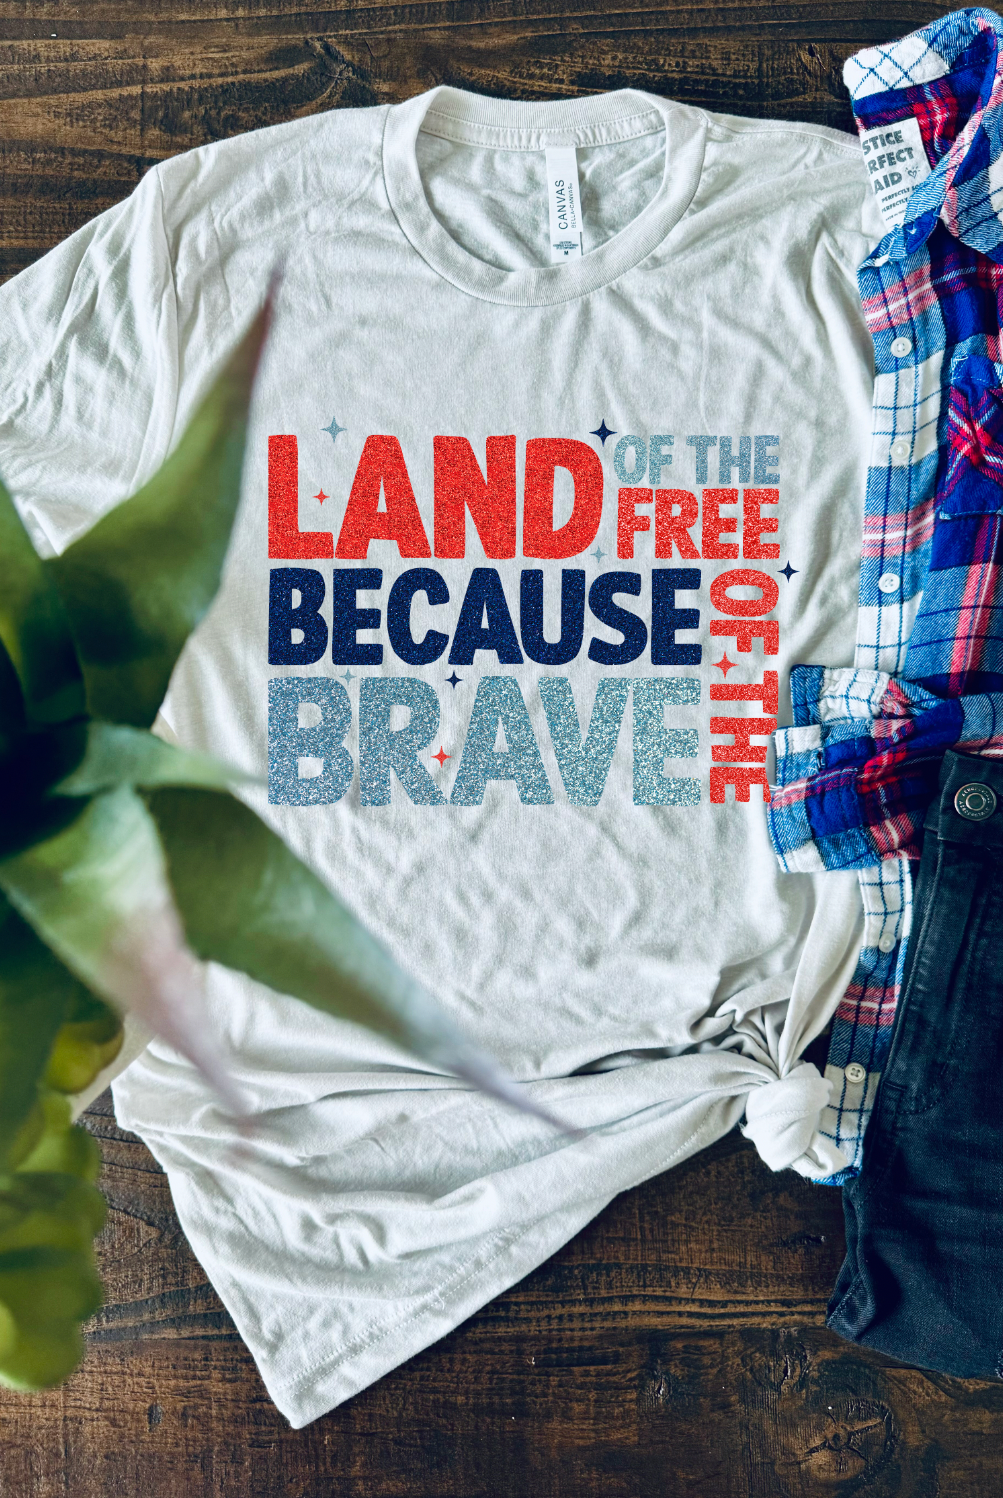 Land of the Free Because of the Brave American Americana Tshirt. Bella and Canvas, made in the USA. Shirt is Cement.